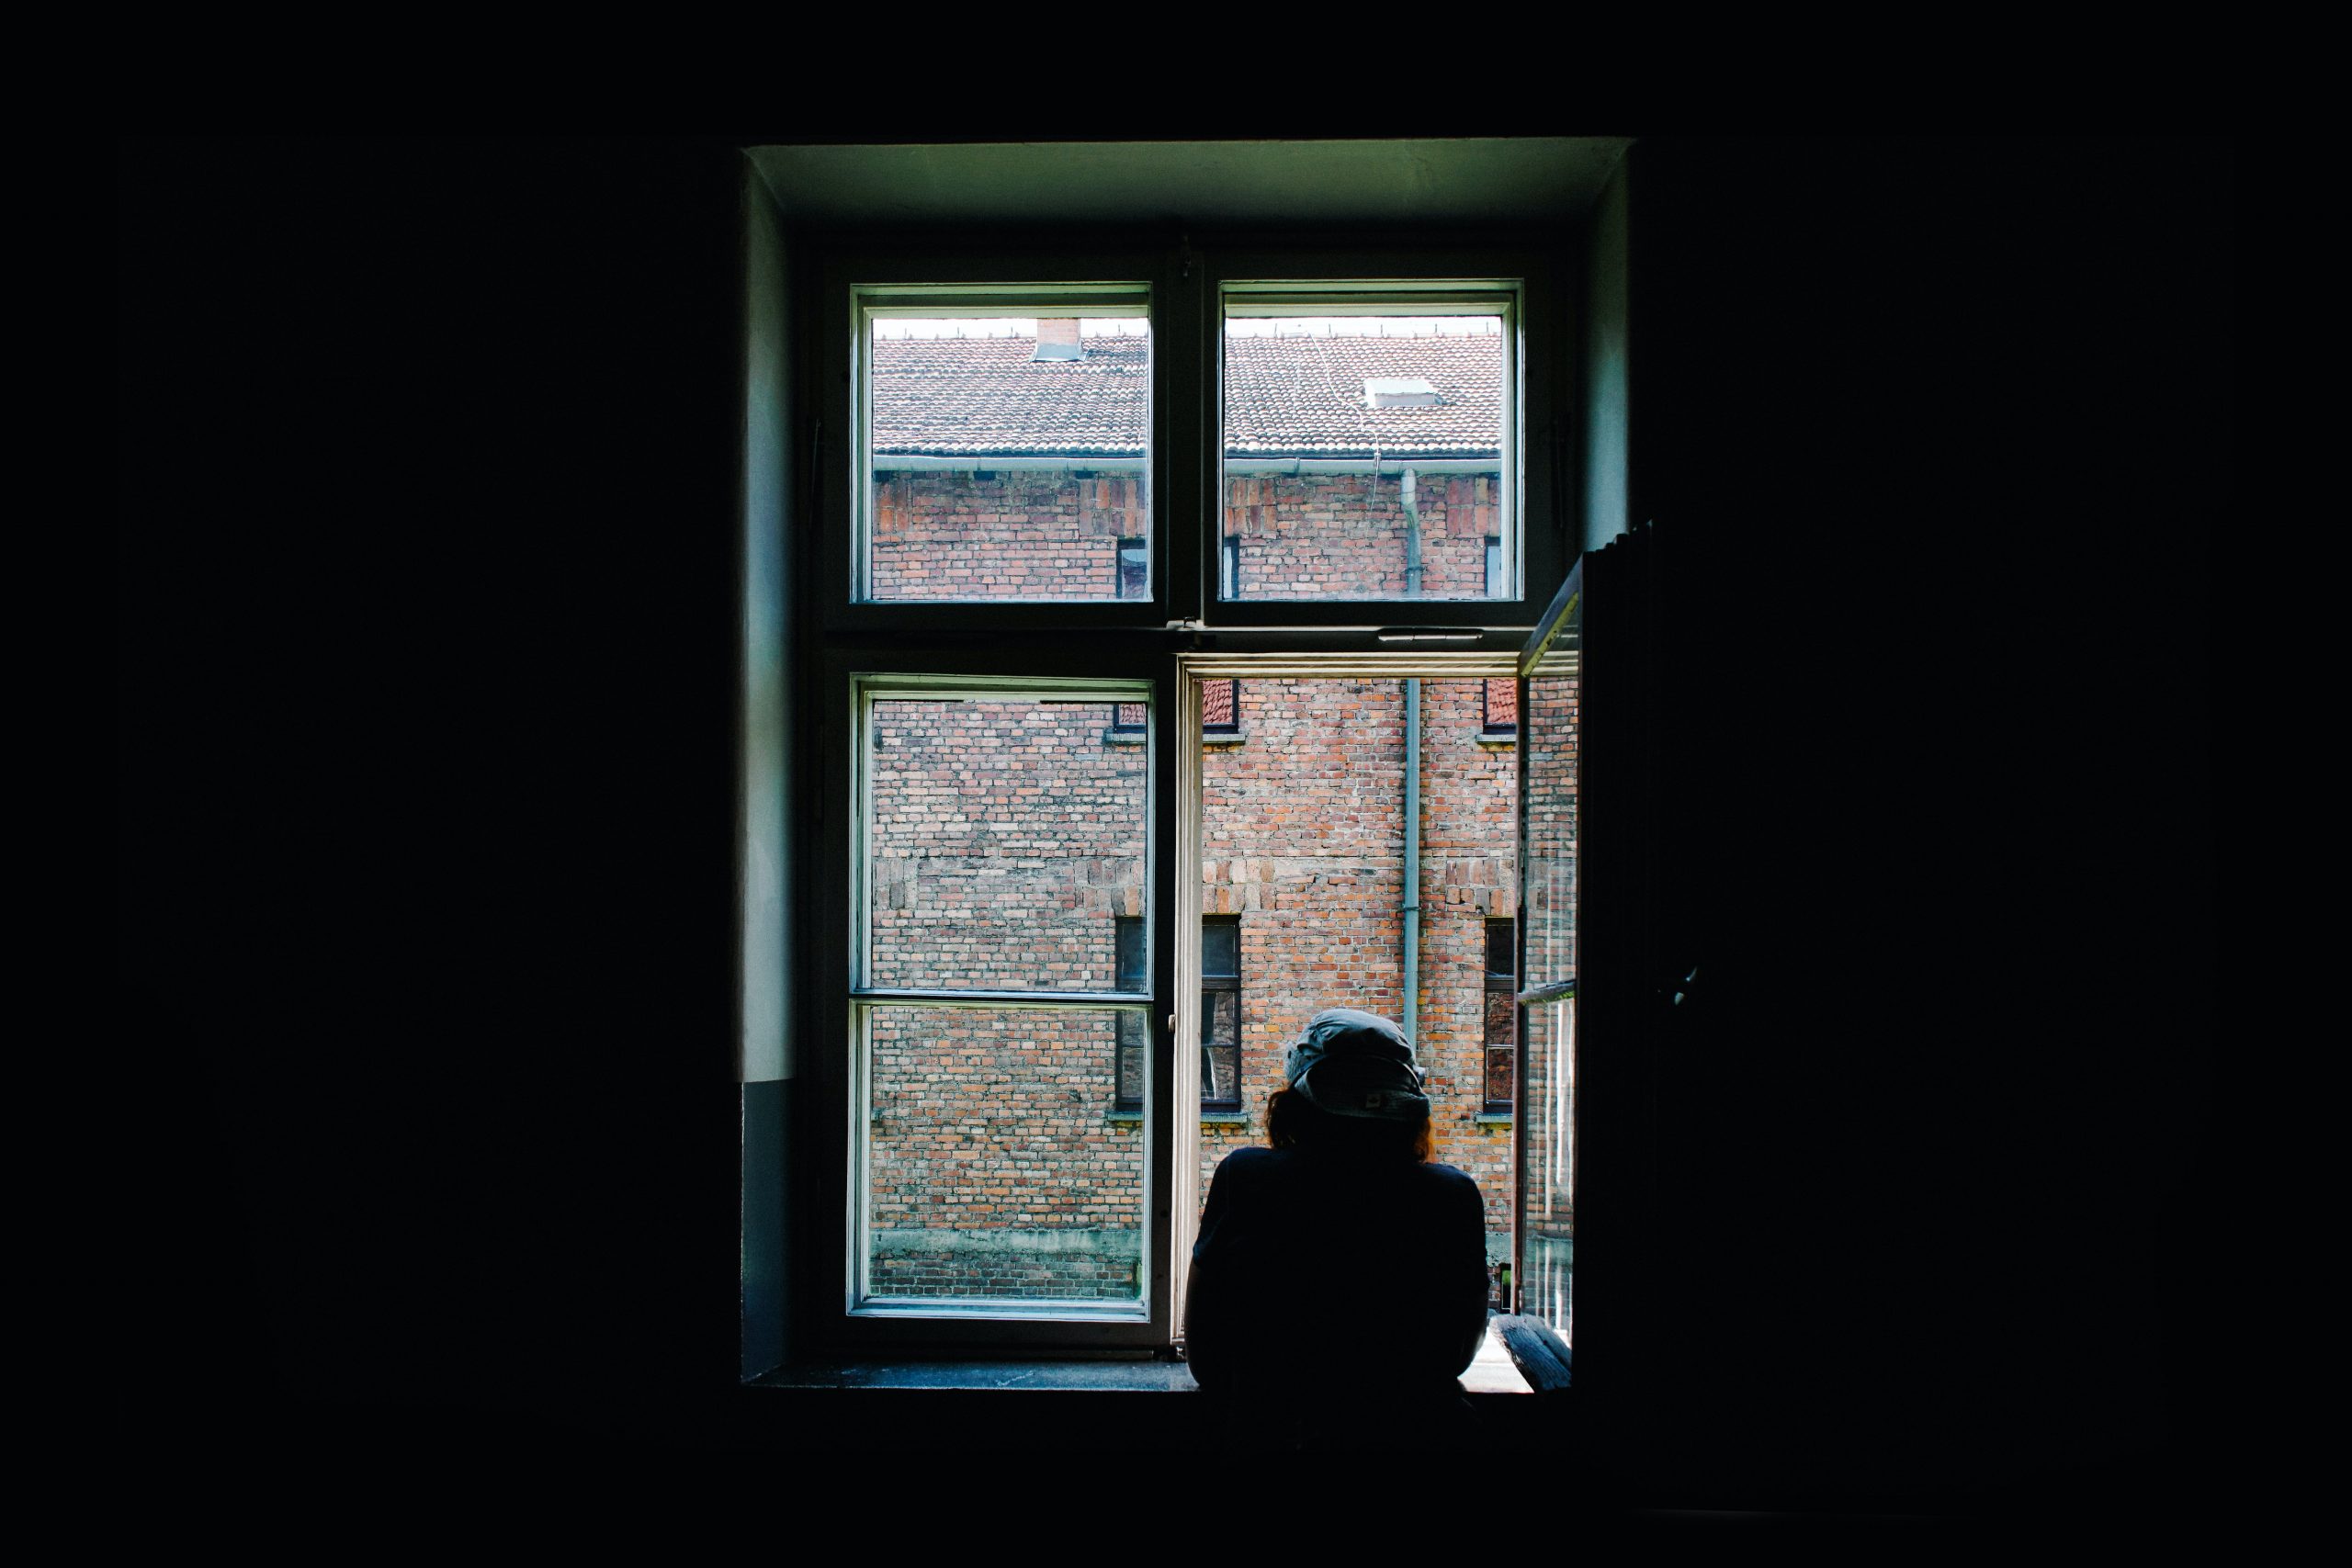 A looks on as she waits for her child to return. Photo: Unsplash